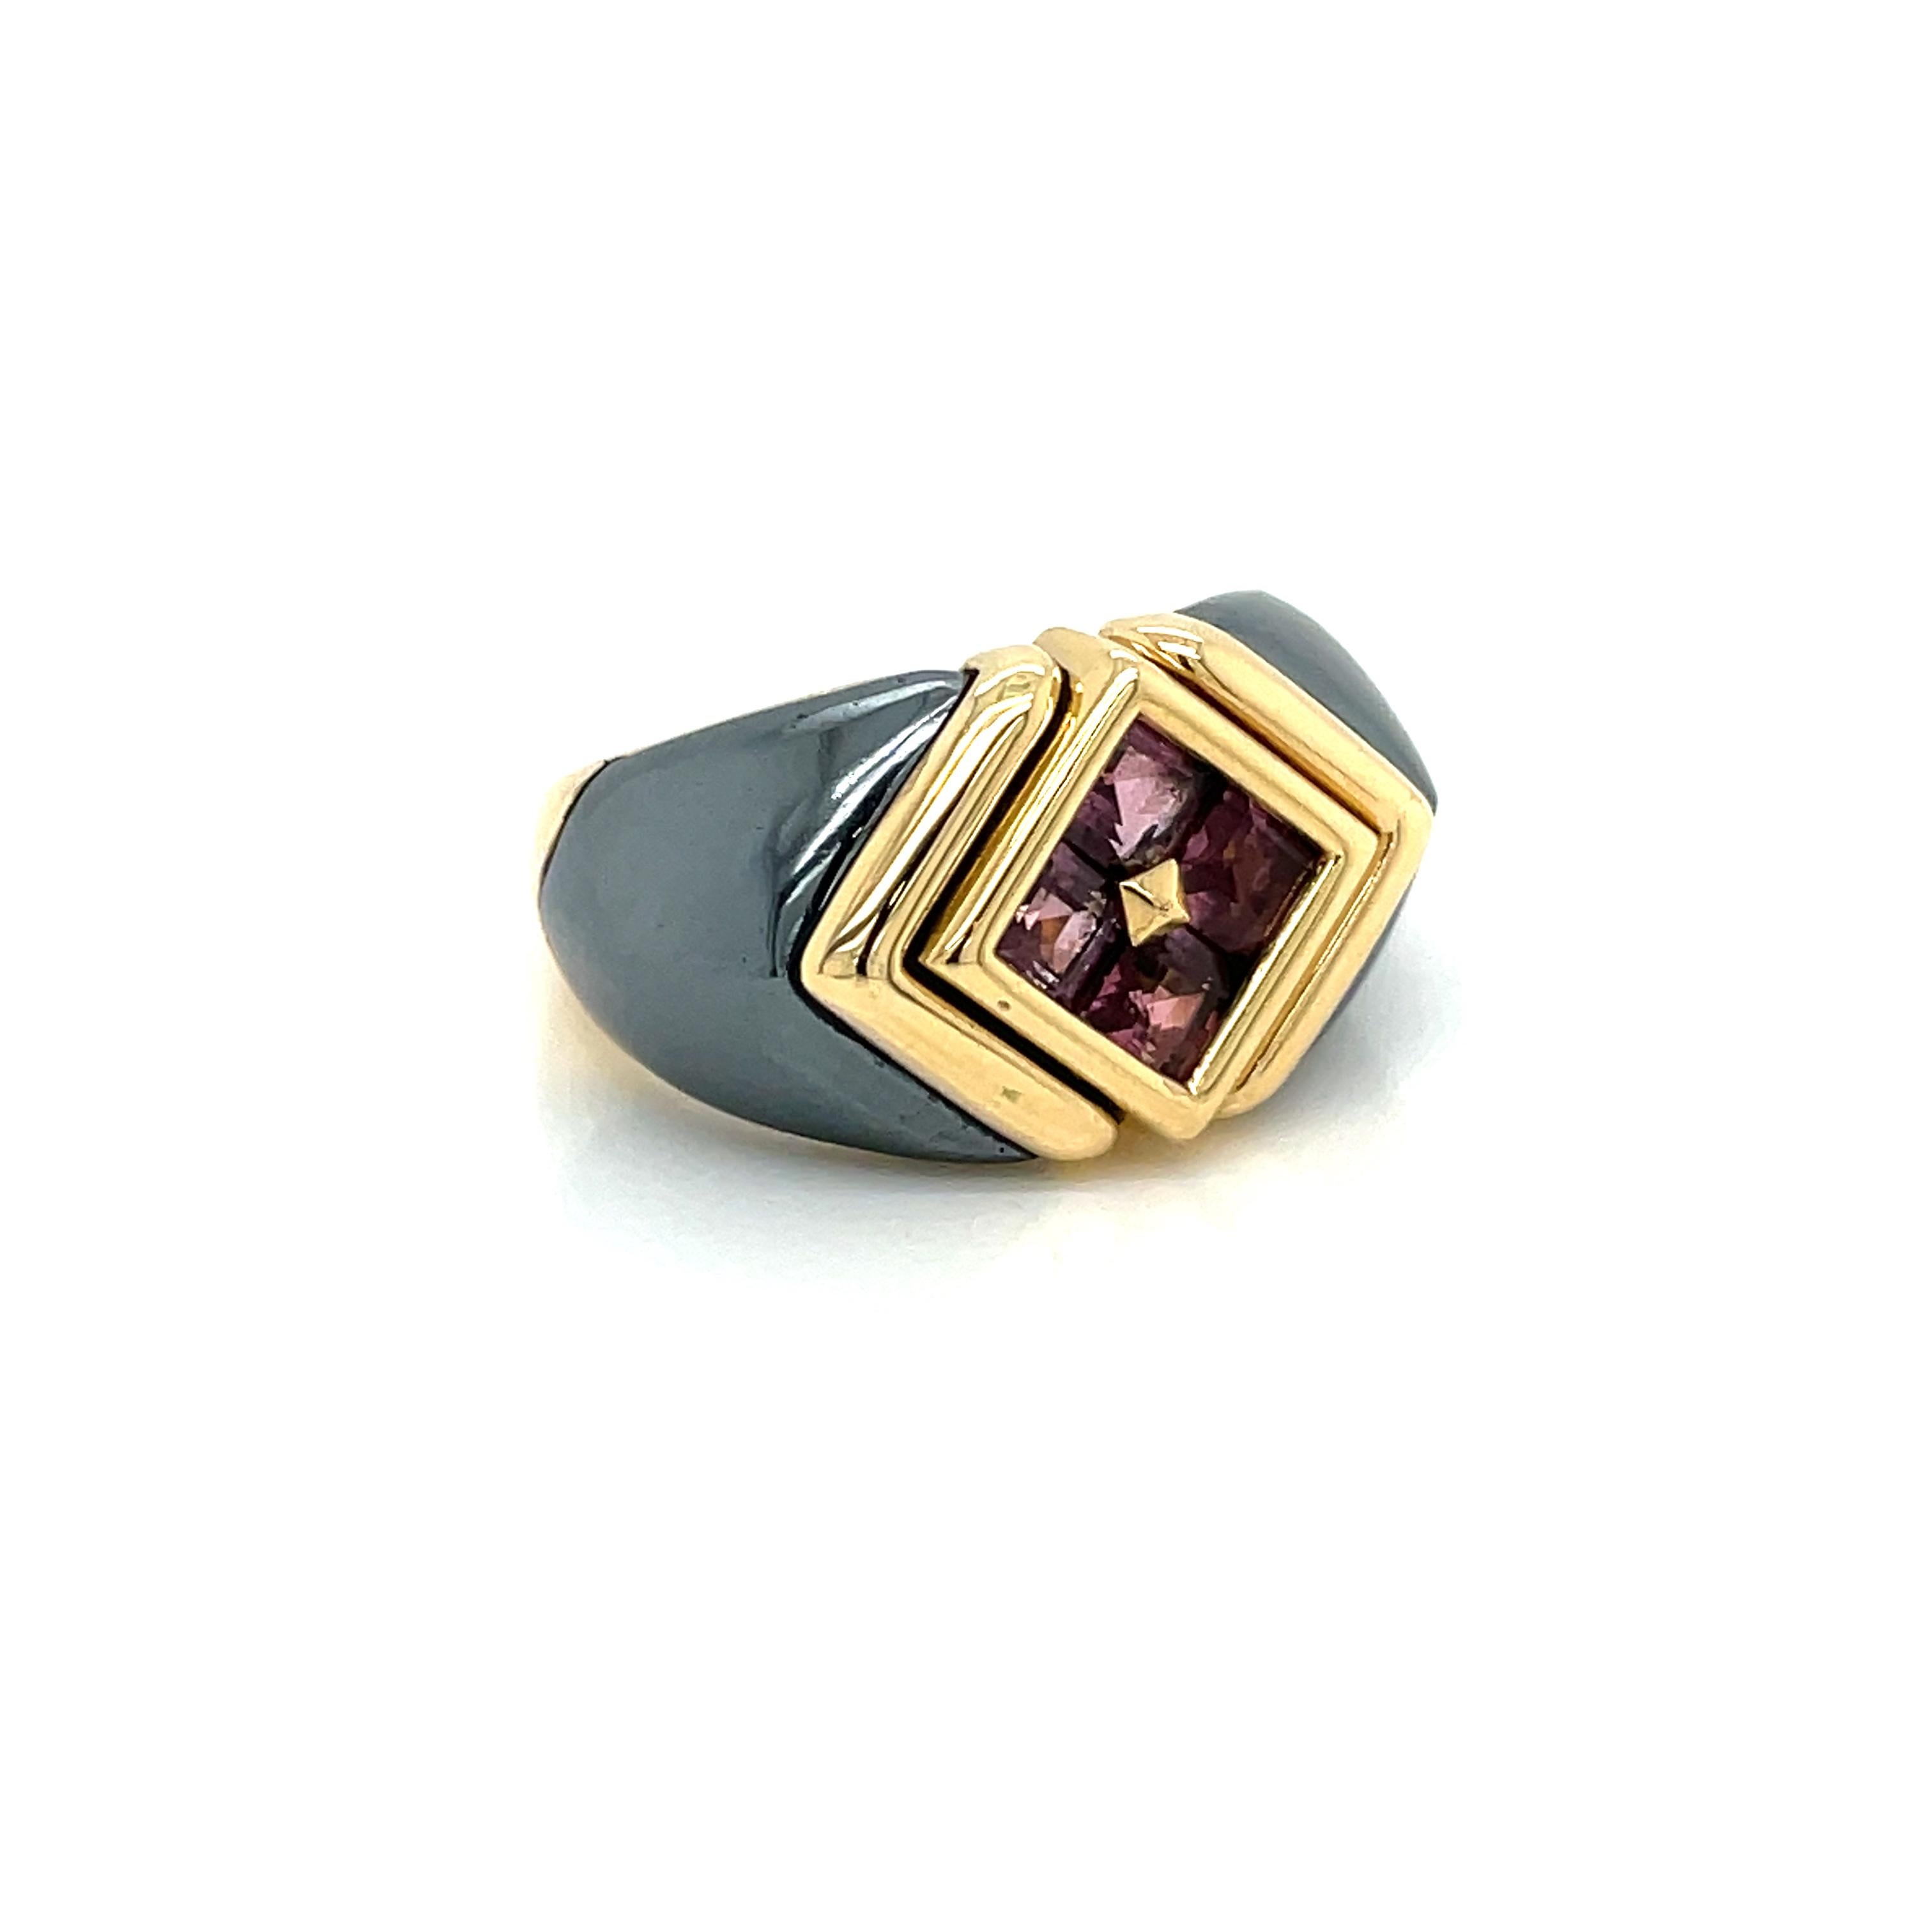 Timeless ring created by Bulgari in Italy in 1988. The set is made of 18 karat yellow Gold, Hematite and four square cut sparkling Tourmalines. 
Stamped BVLGARI, with the maker's mark, the Italian gold assay hallmark, numbered and dated 1988'.

The